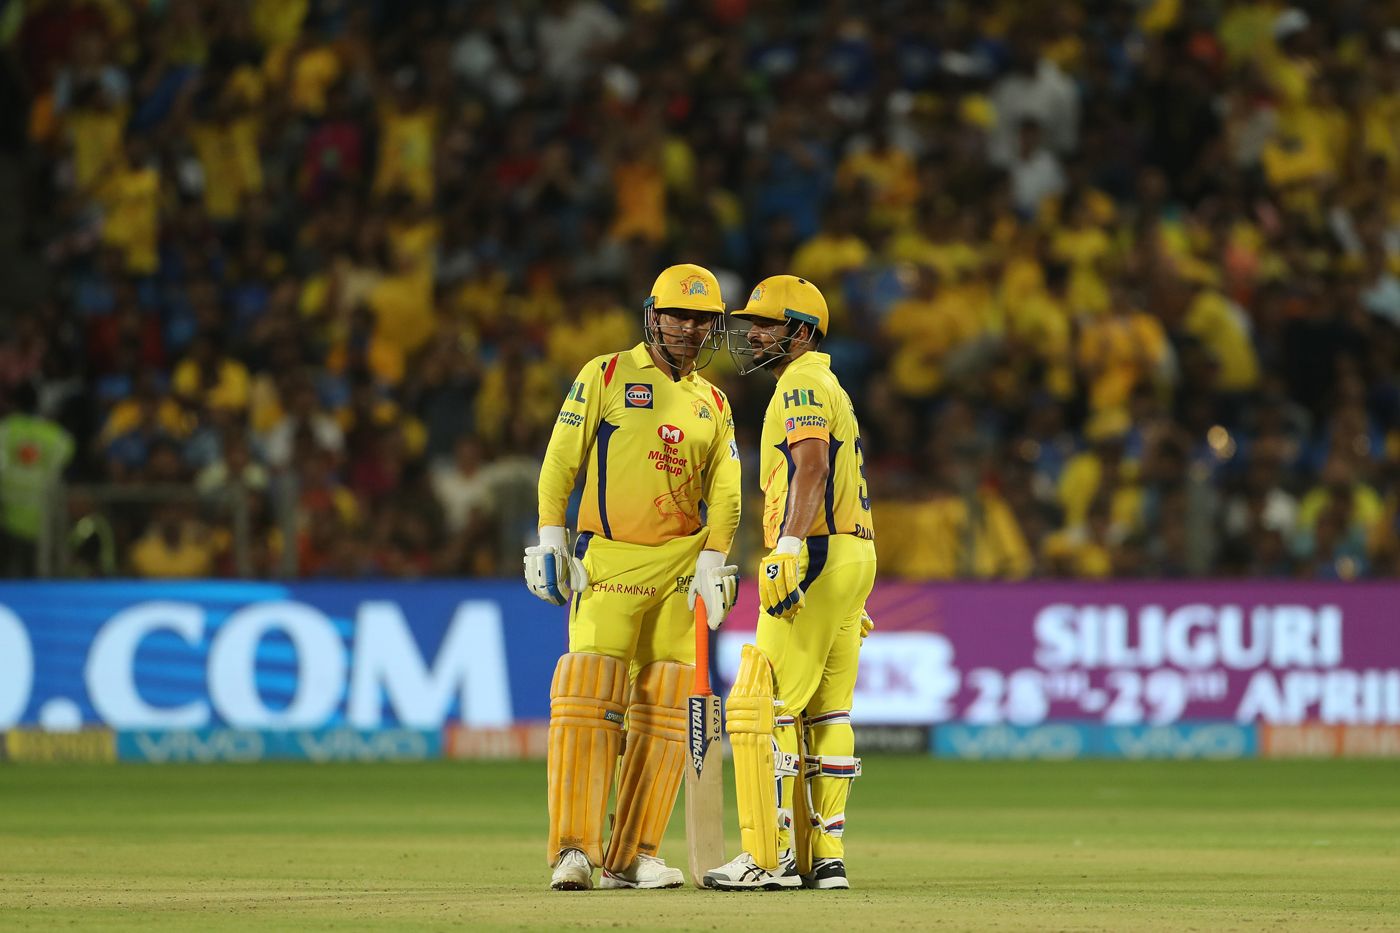 MS Dhoni Reuited WIth Suresh Raina In Chennai For The CSK Camp